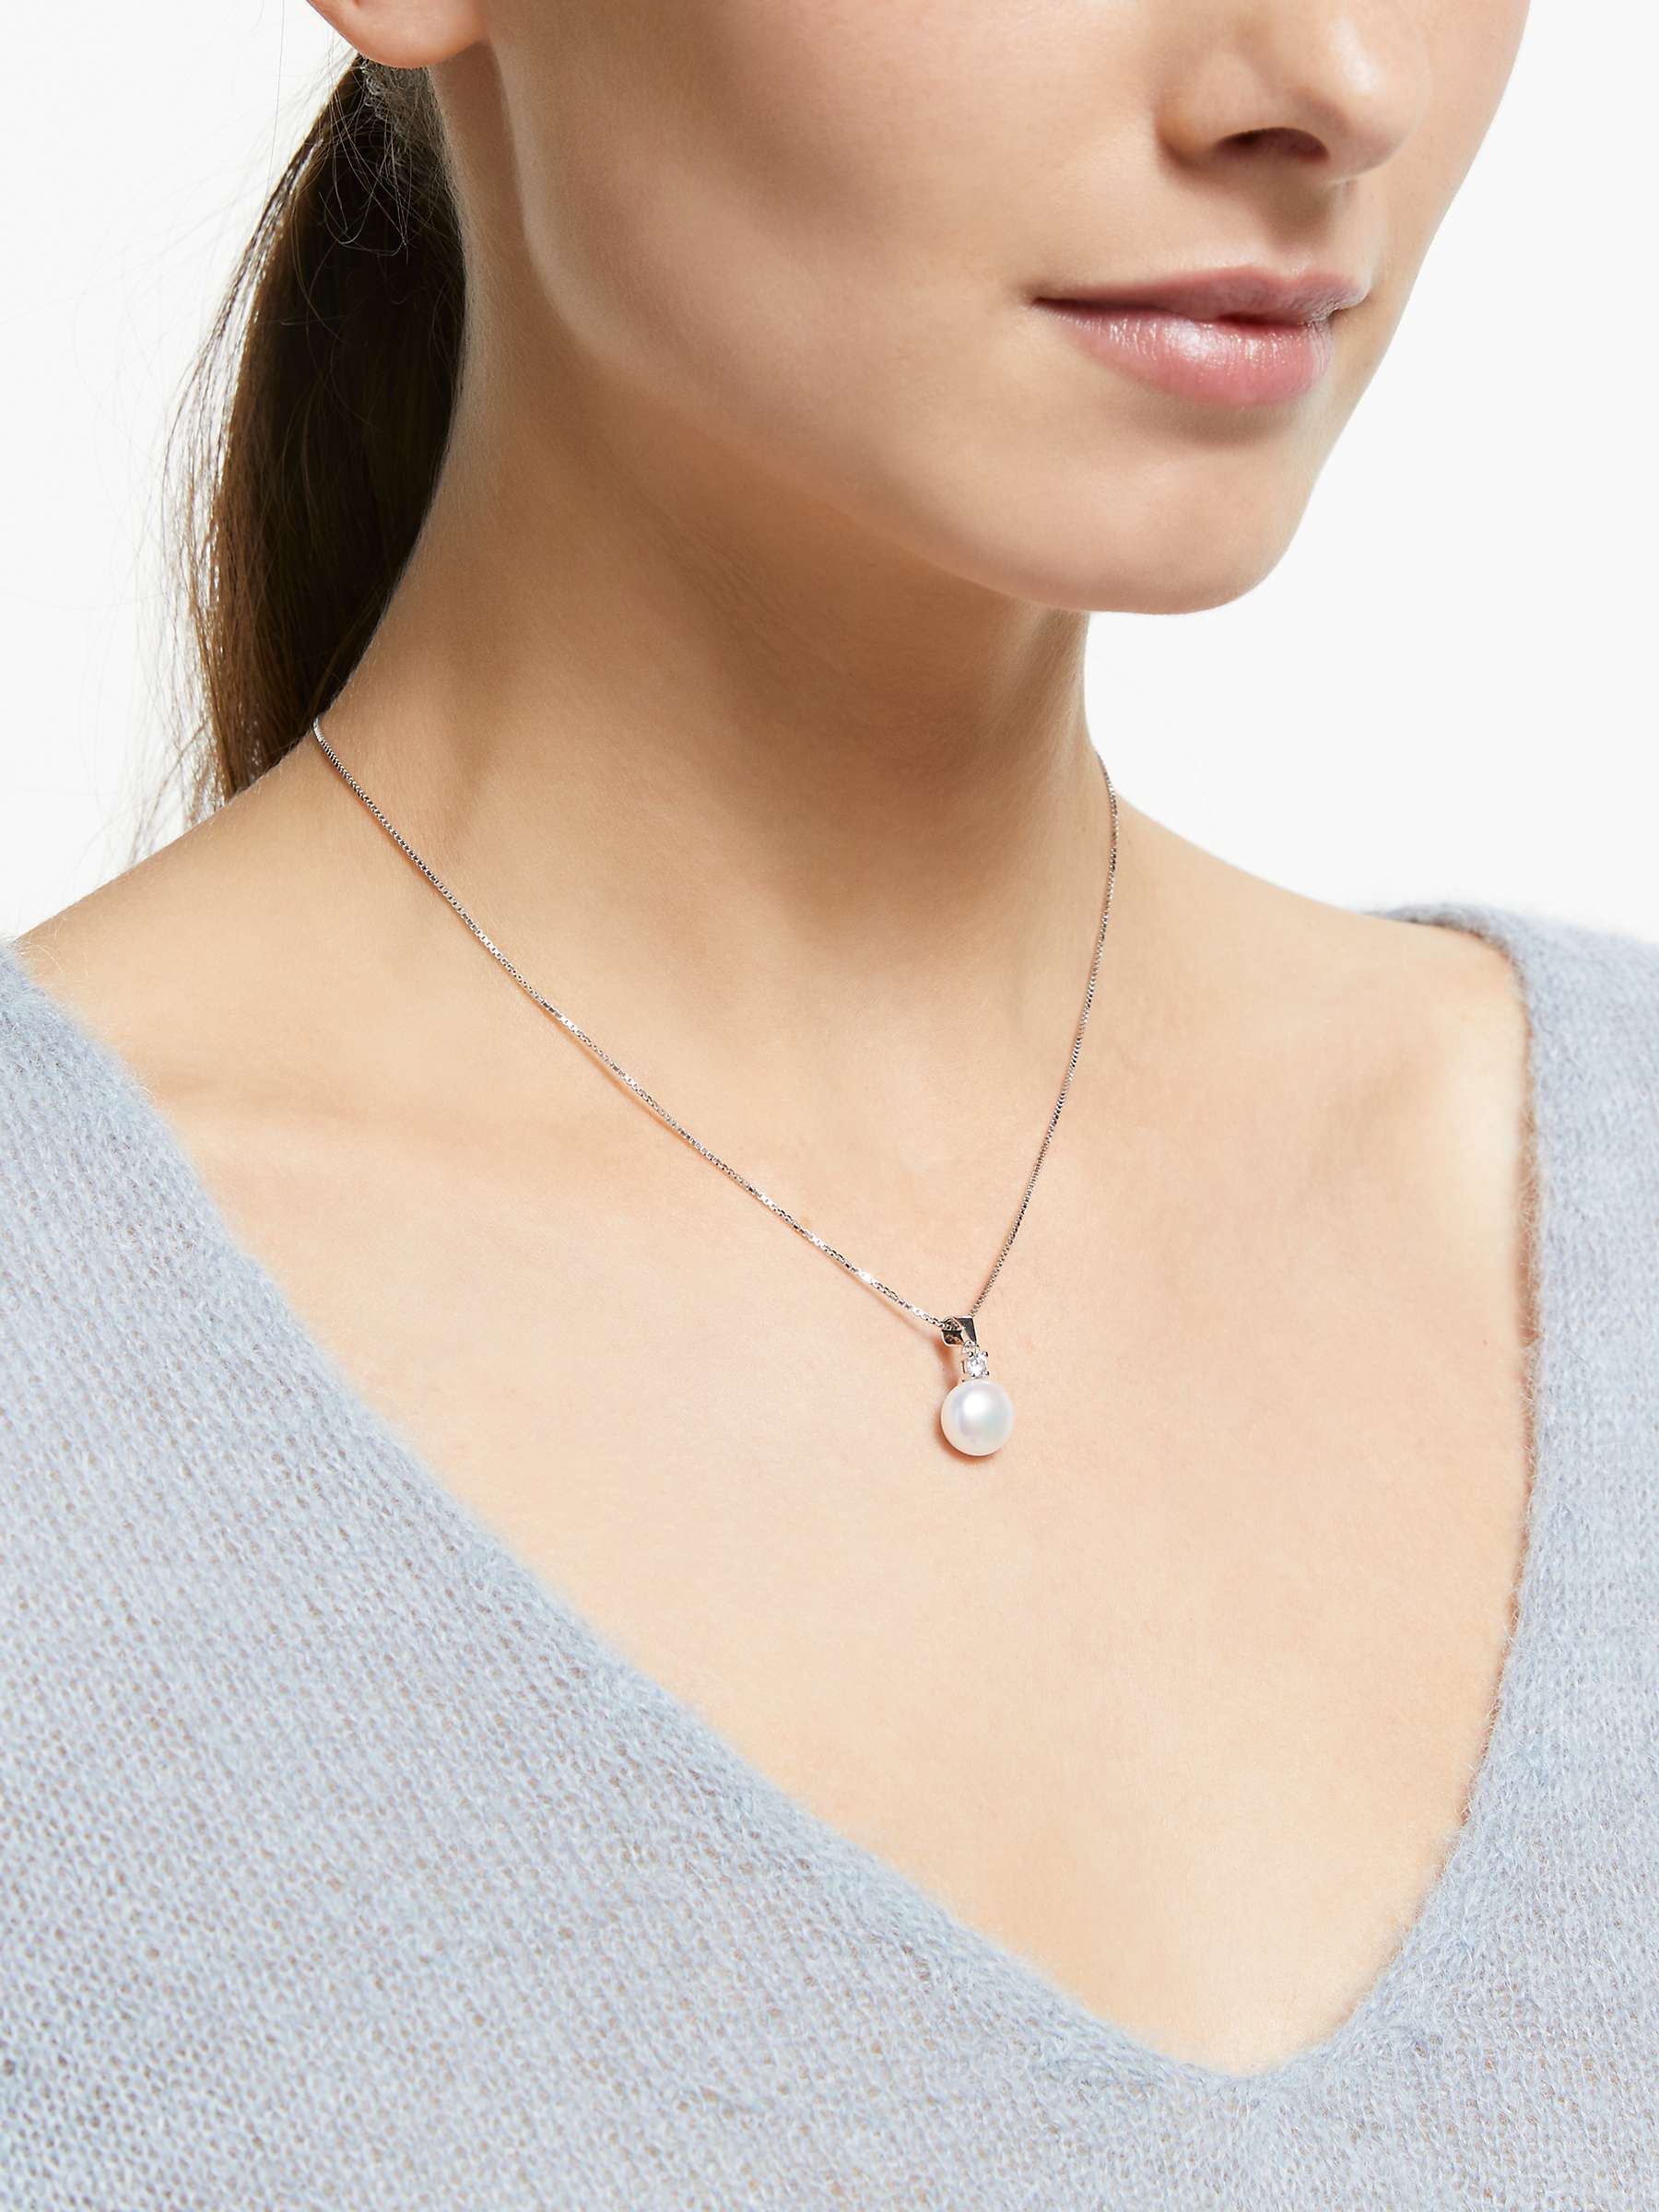 Buy Lido Large Button Pearl Small Cubic Zirconia Pendant Necklace, Silver/White Online at johnlewis.com